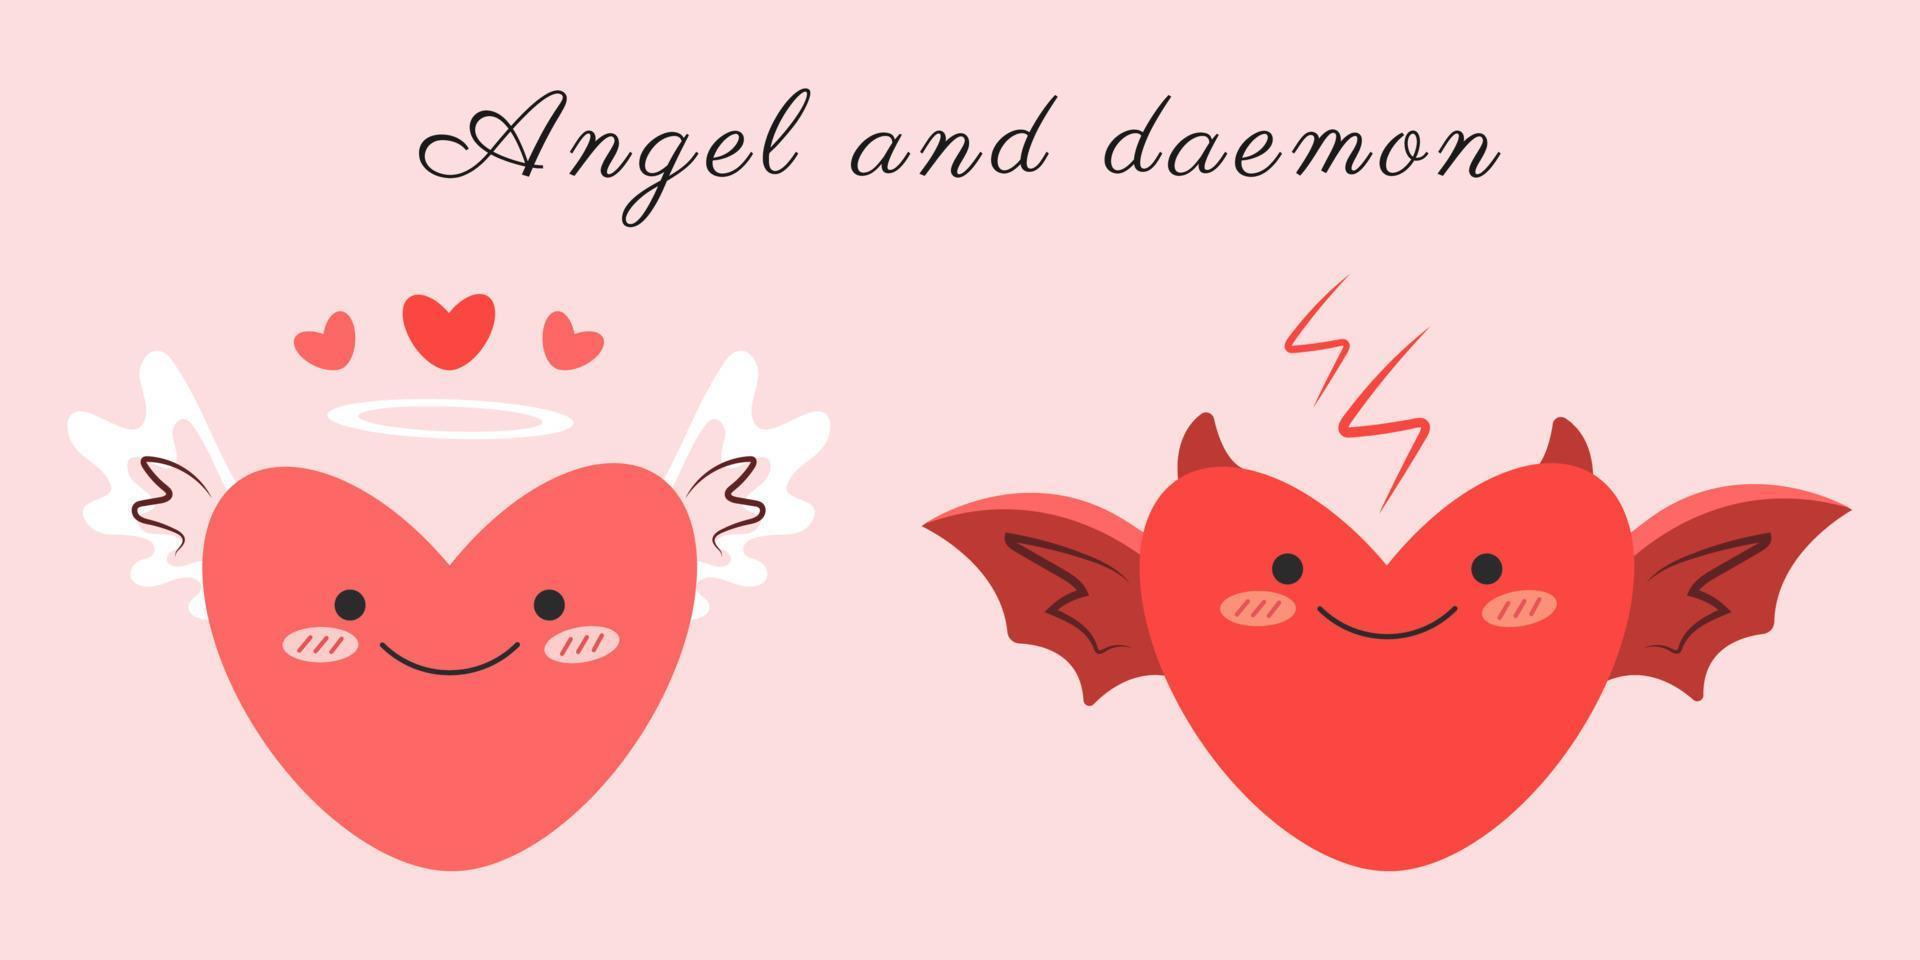 Angel and demon. Hearts characters for your design by Valentine's day. Vector illustration.